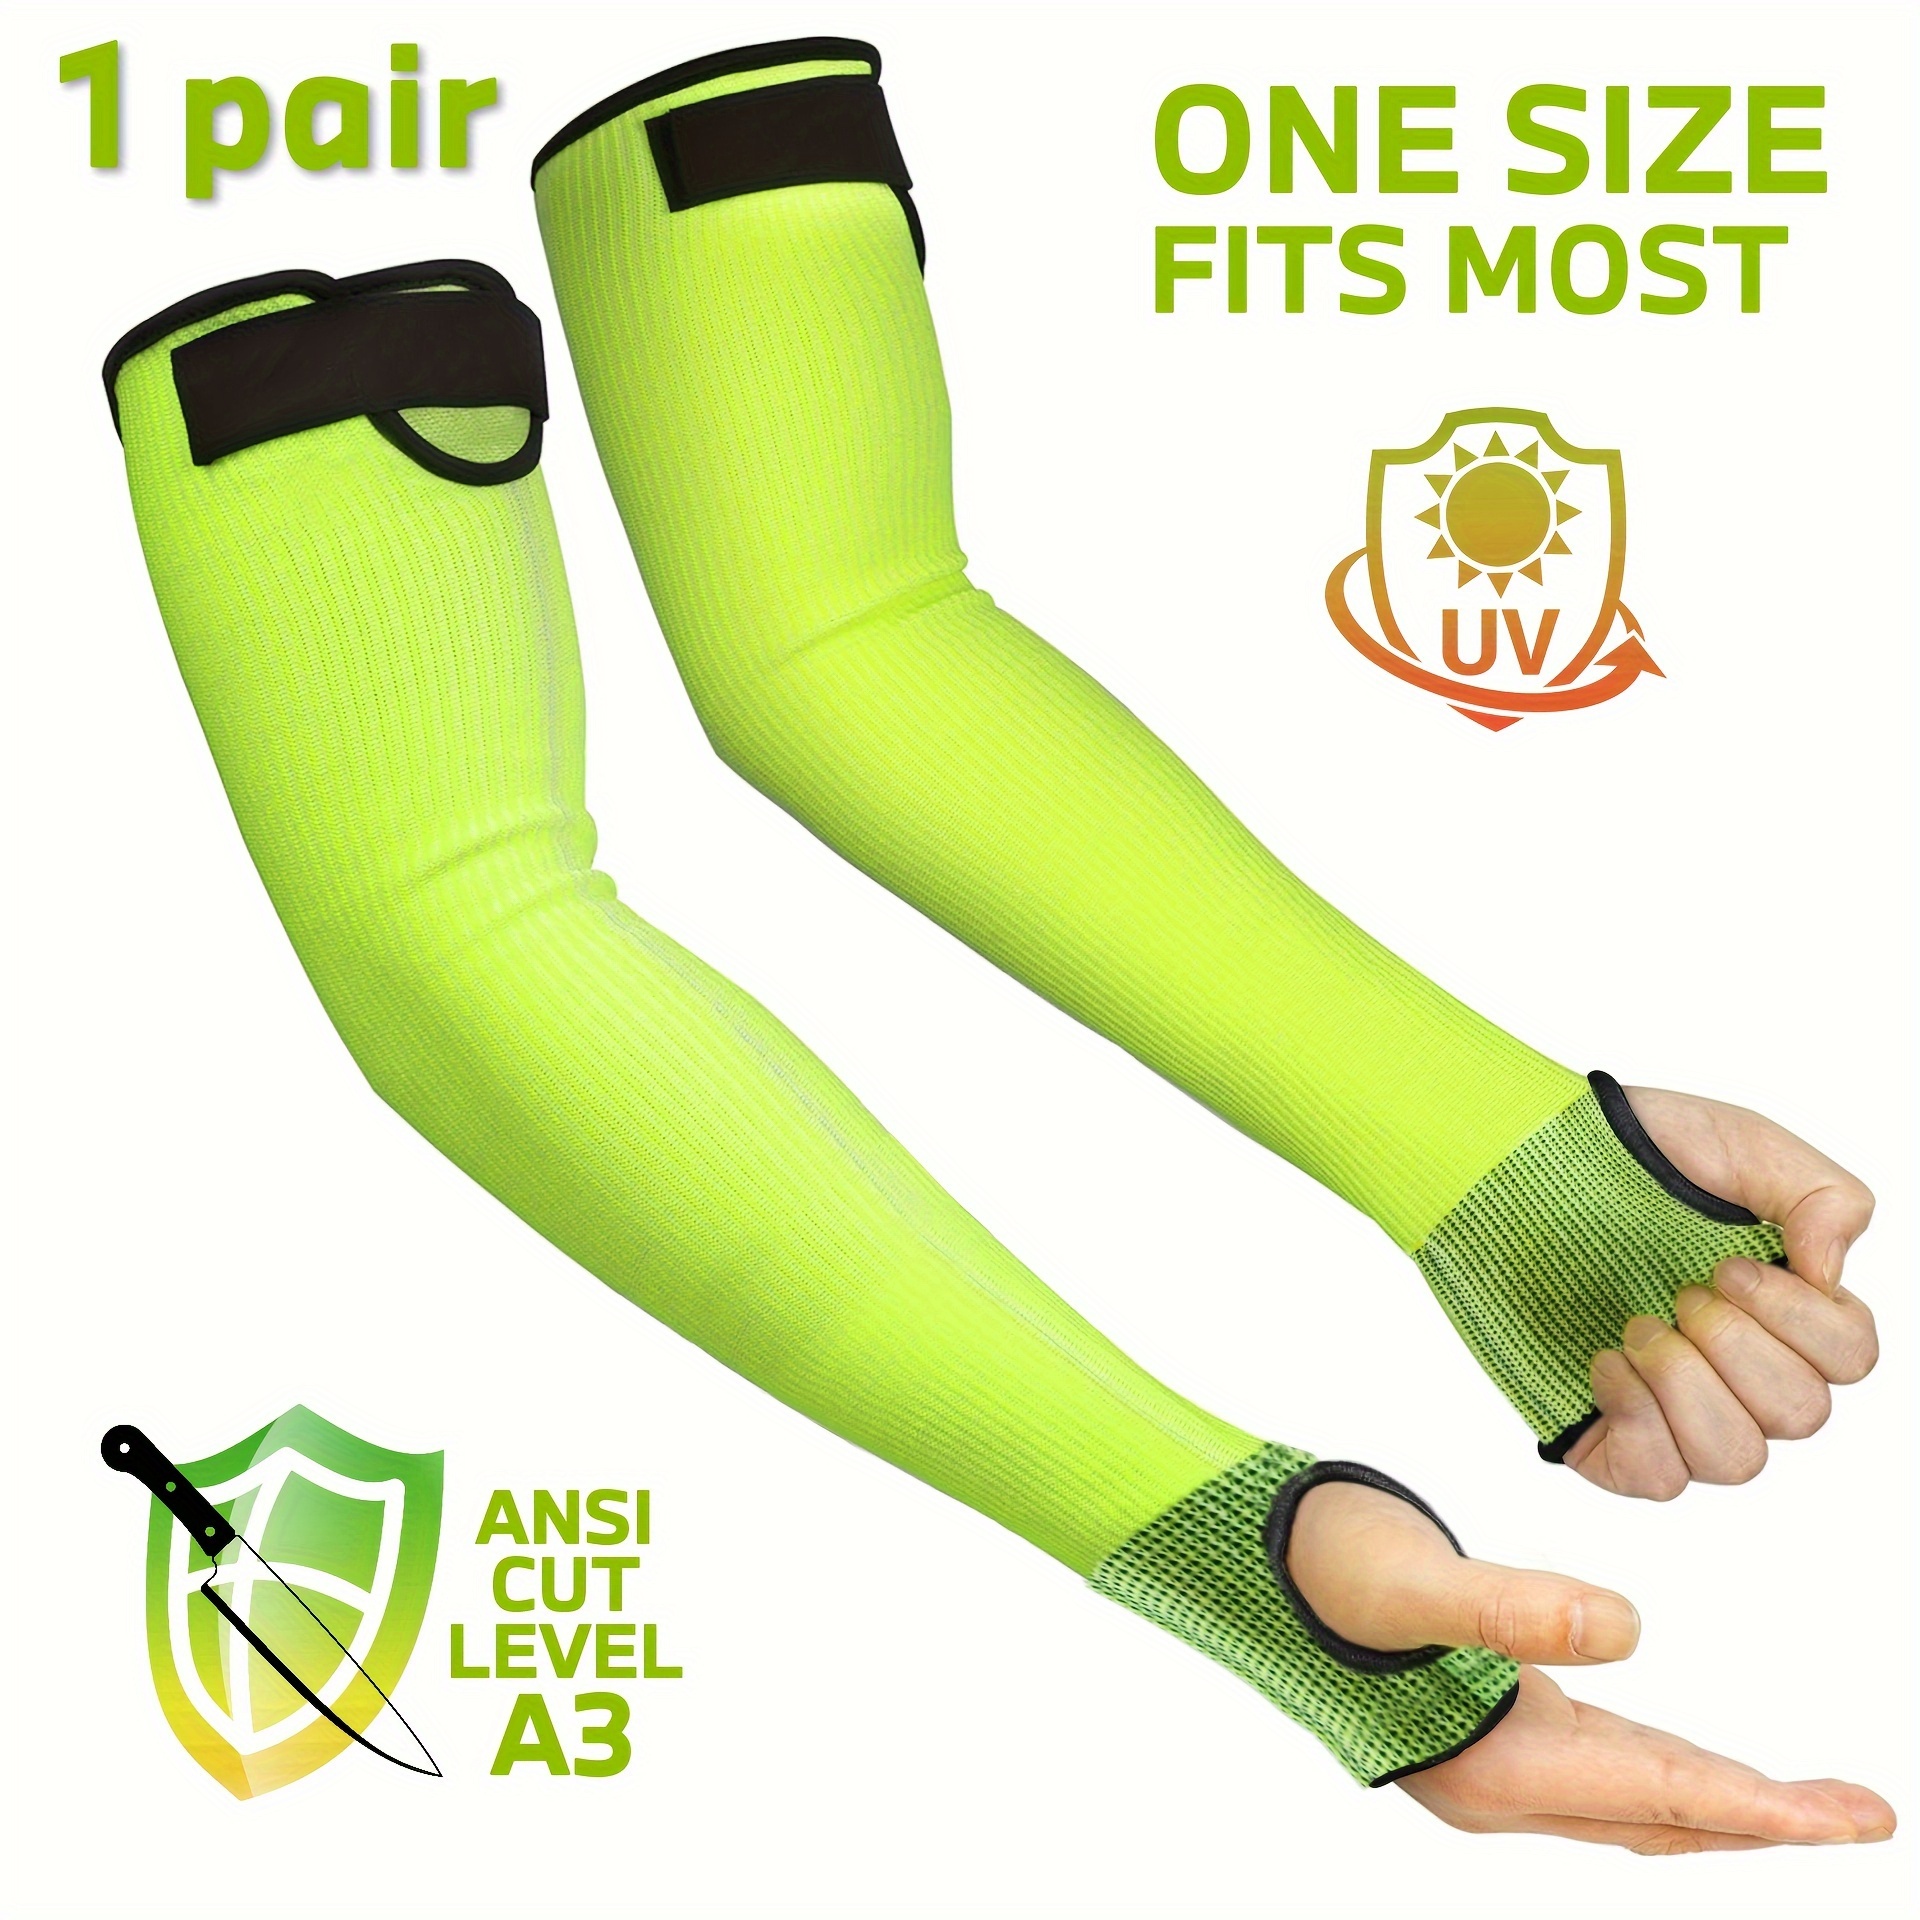 

1 Pair Cut Resistant Sleeves With Hole And Adjustable Hook And Loop, Protective Arm Sleeves For Yard Work, Kitchen, Arm Guards For Biting, Pet Grooming, Gardening Gifts For Women, Green